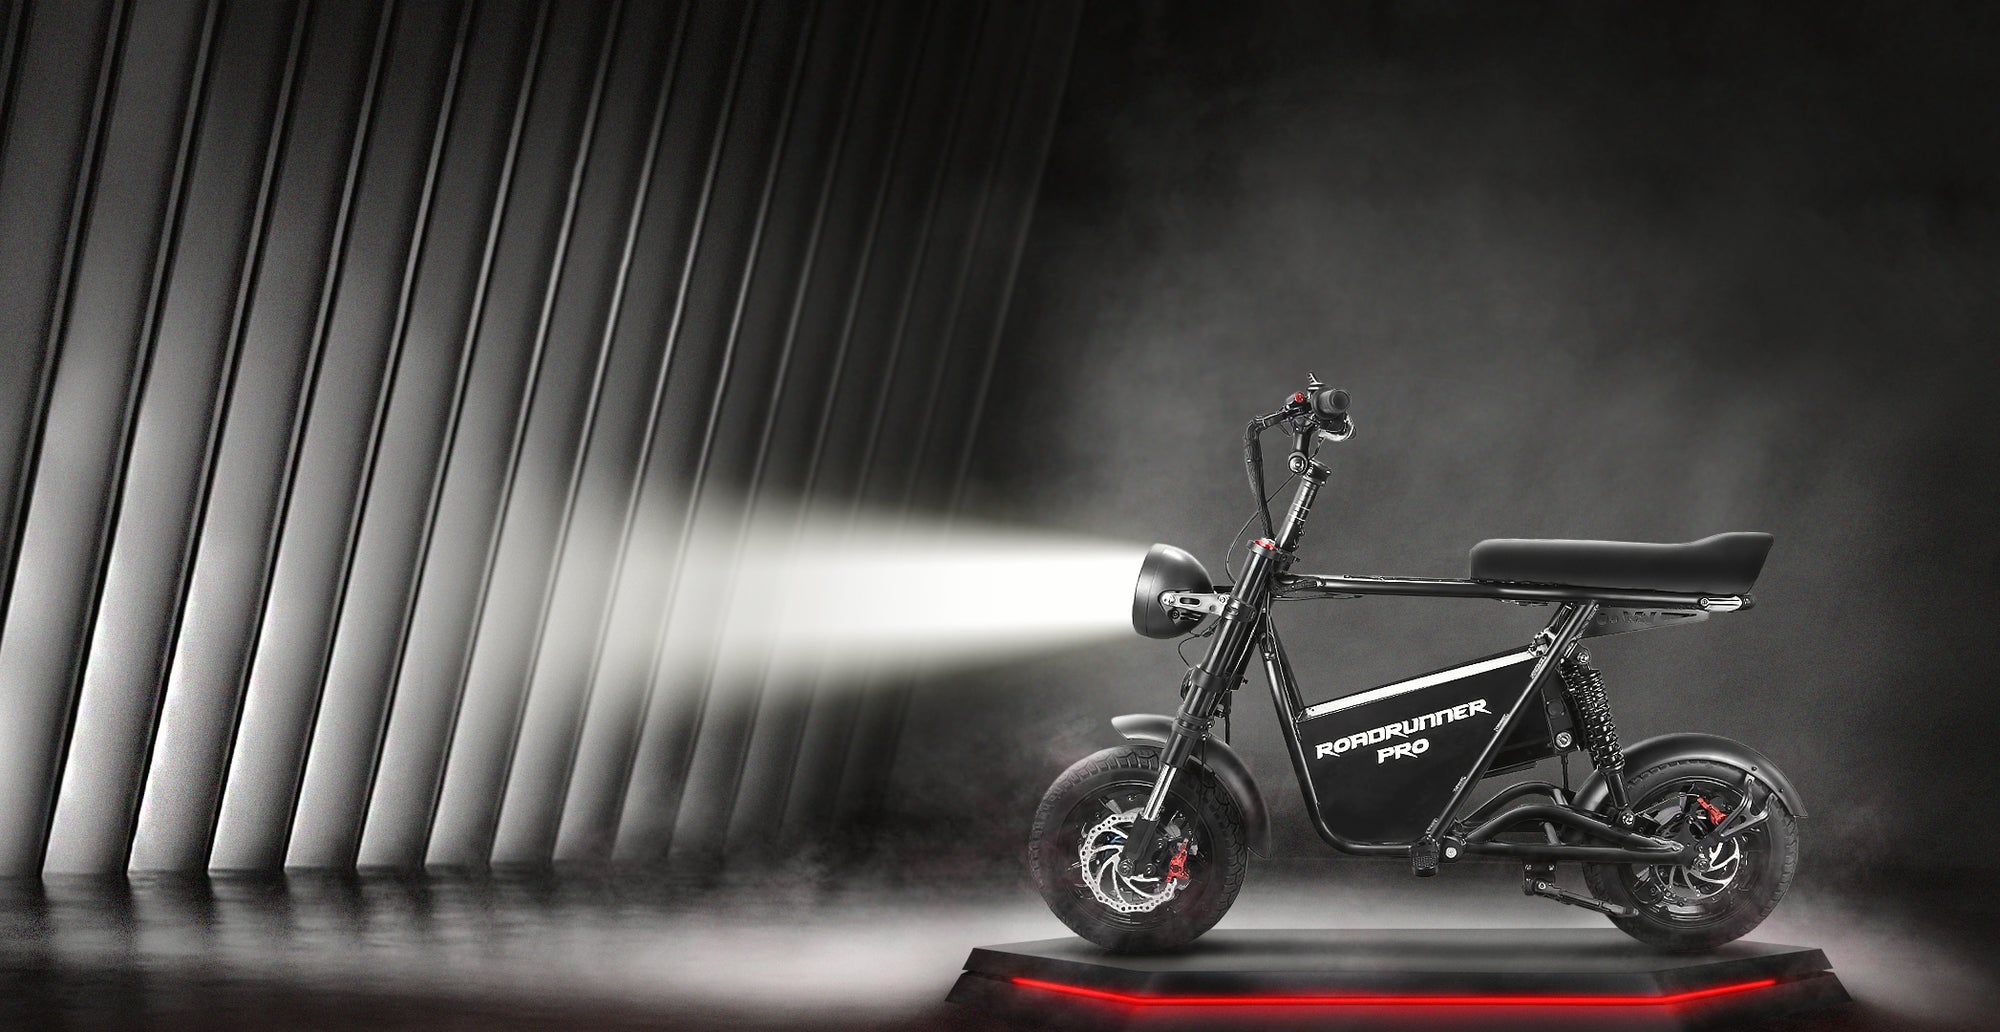 EMOVE RoadRunner Pro Exclusive Launch: It's Like a Mini Electric Motorcycle, But So Much Better